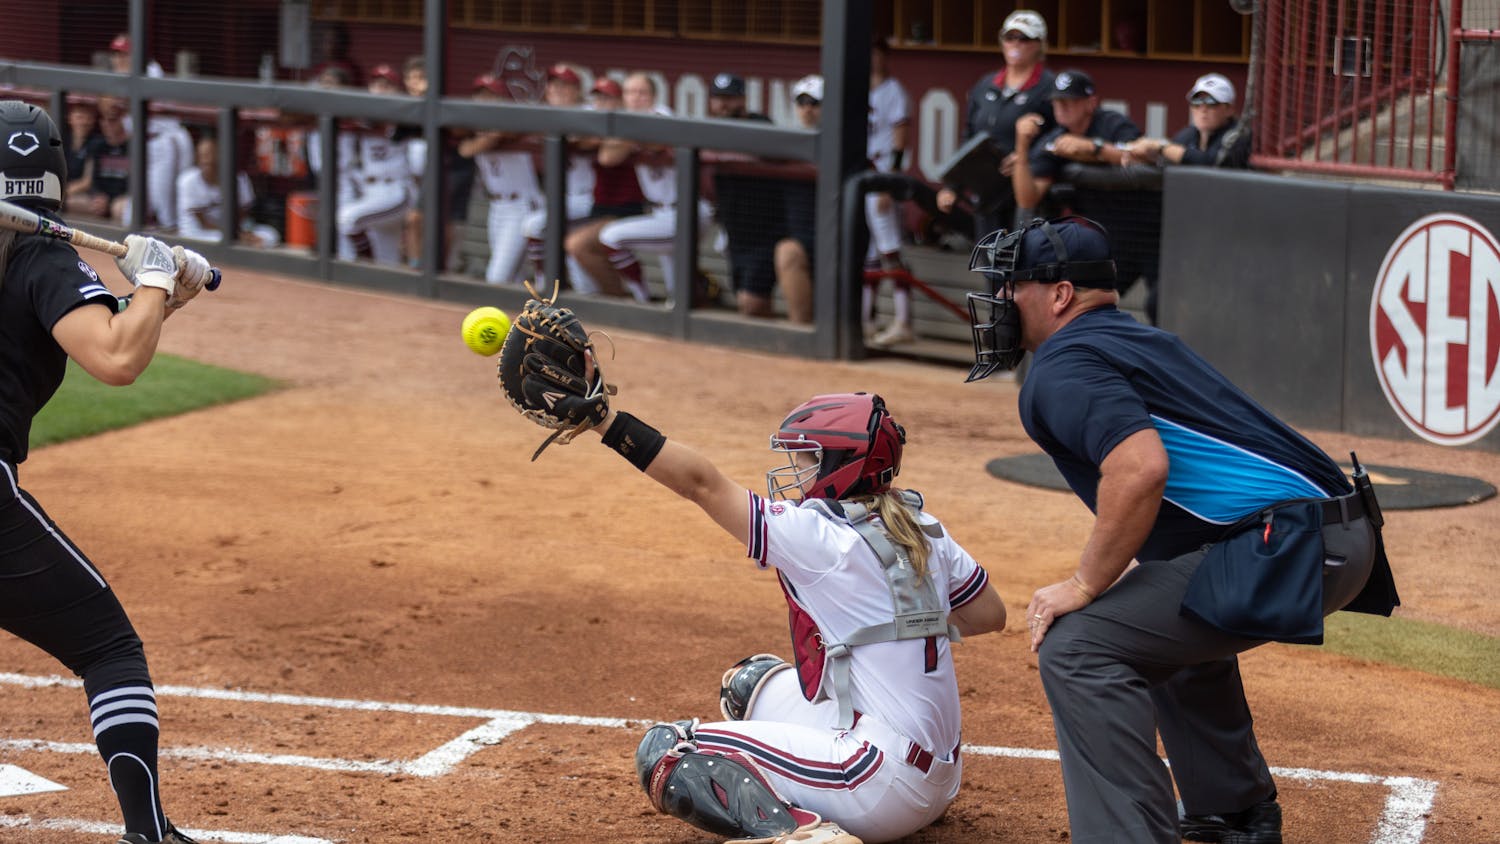 Sophomore catcher Giulia Desiderio holds her mitt up in the air, preparing the catch the ball. The Gamecocks played the Aggies at Beckham Field on April 16, 2023, winning the game 8-0 to sweep the series.&nbsp;